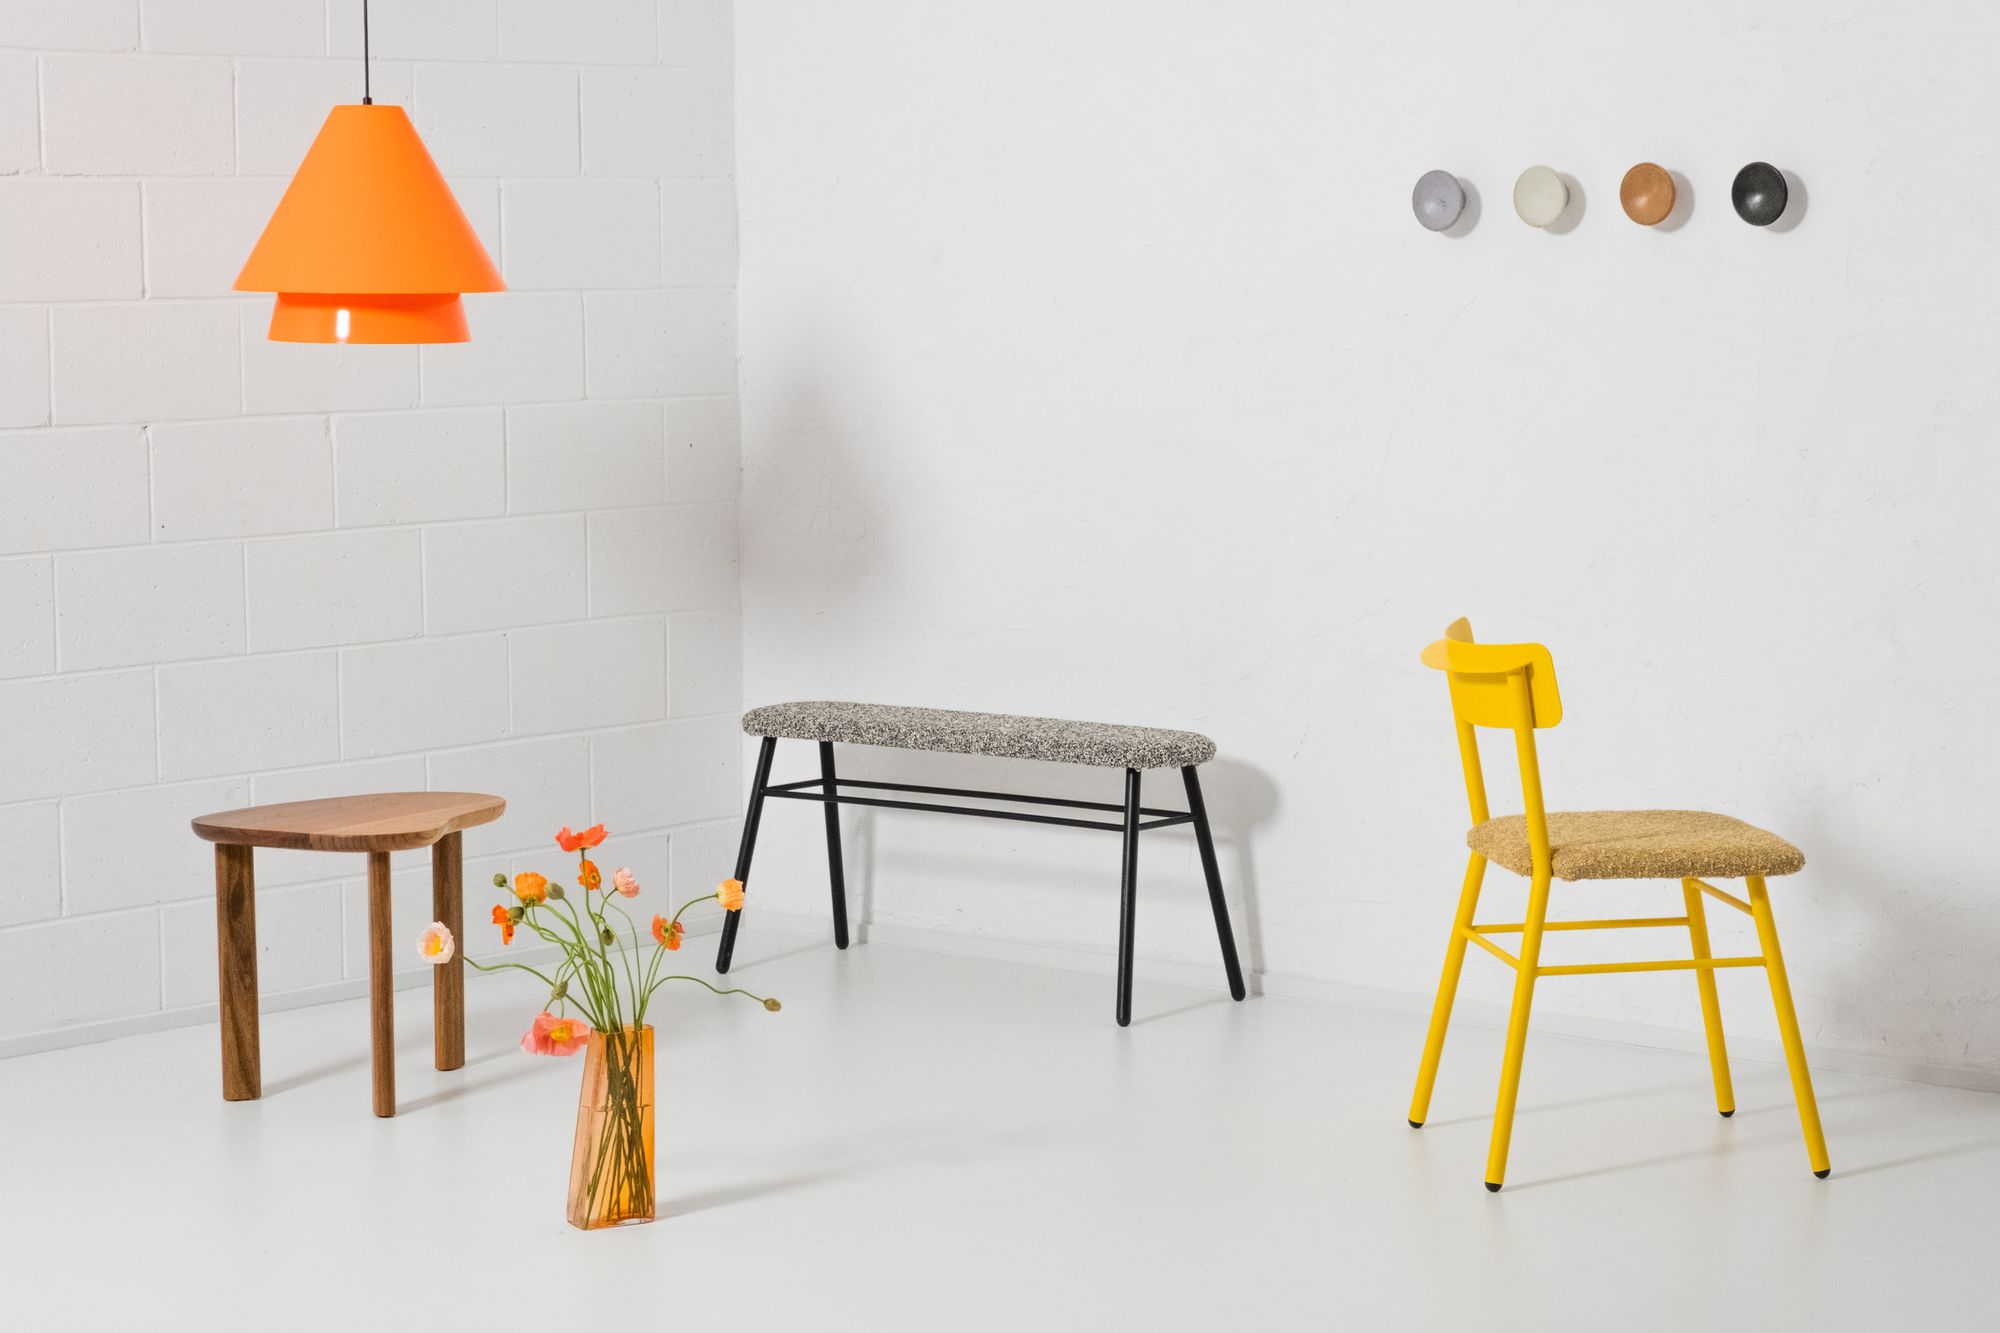 JamFactory Collection showing a range of chairs, benches, side tables, vases, pendant lights and wall hooks